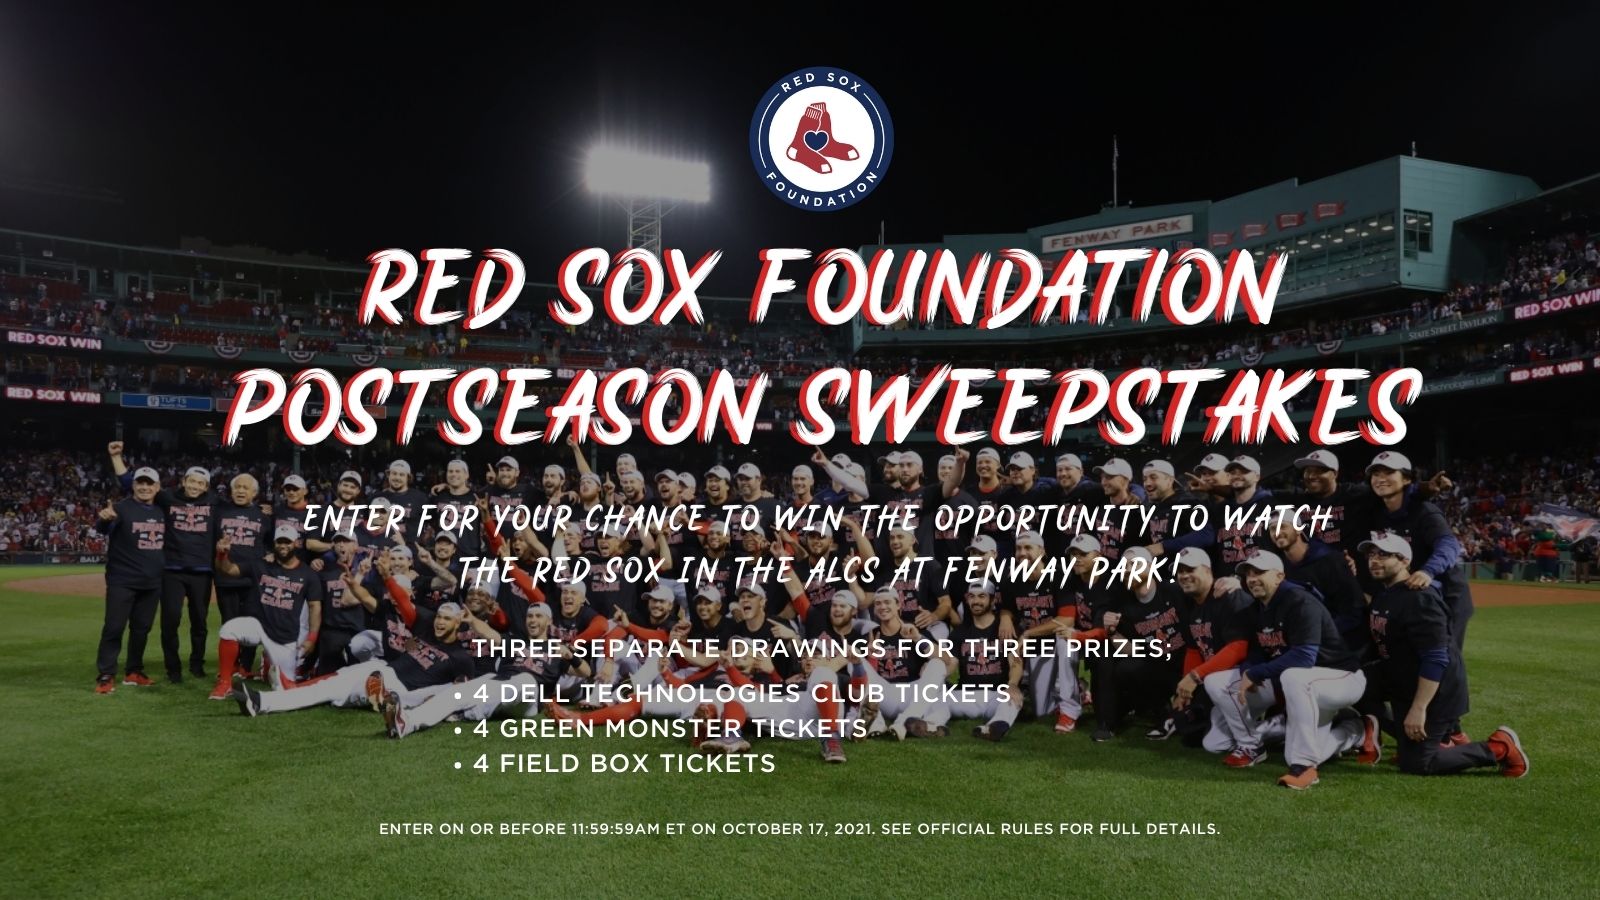 2021 Red Sox Foundation Postseason Sweepstakes ALCS Winning Numbers